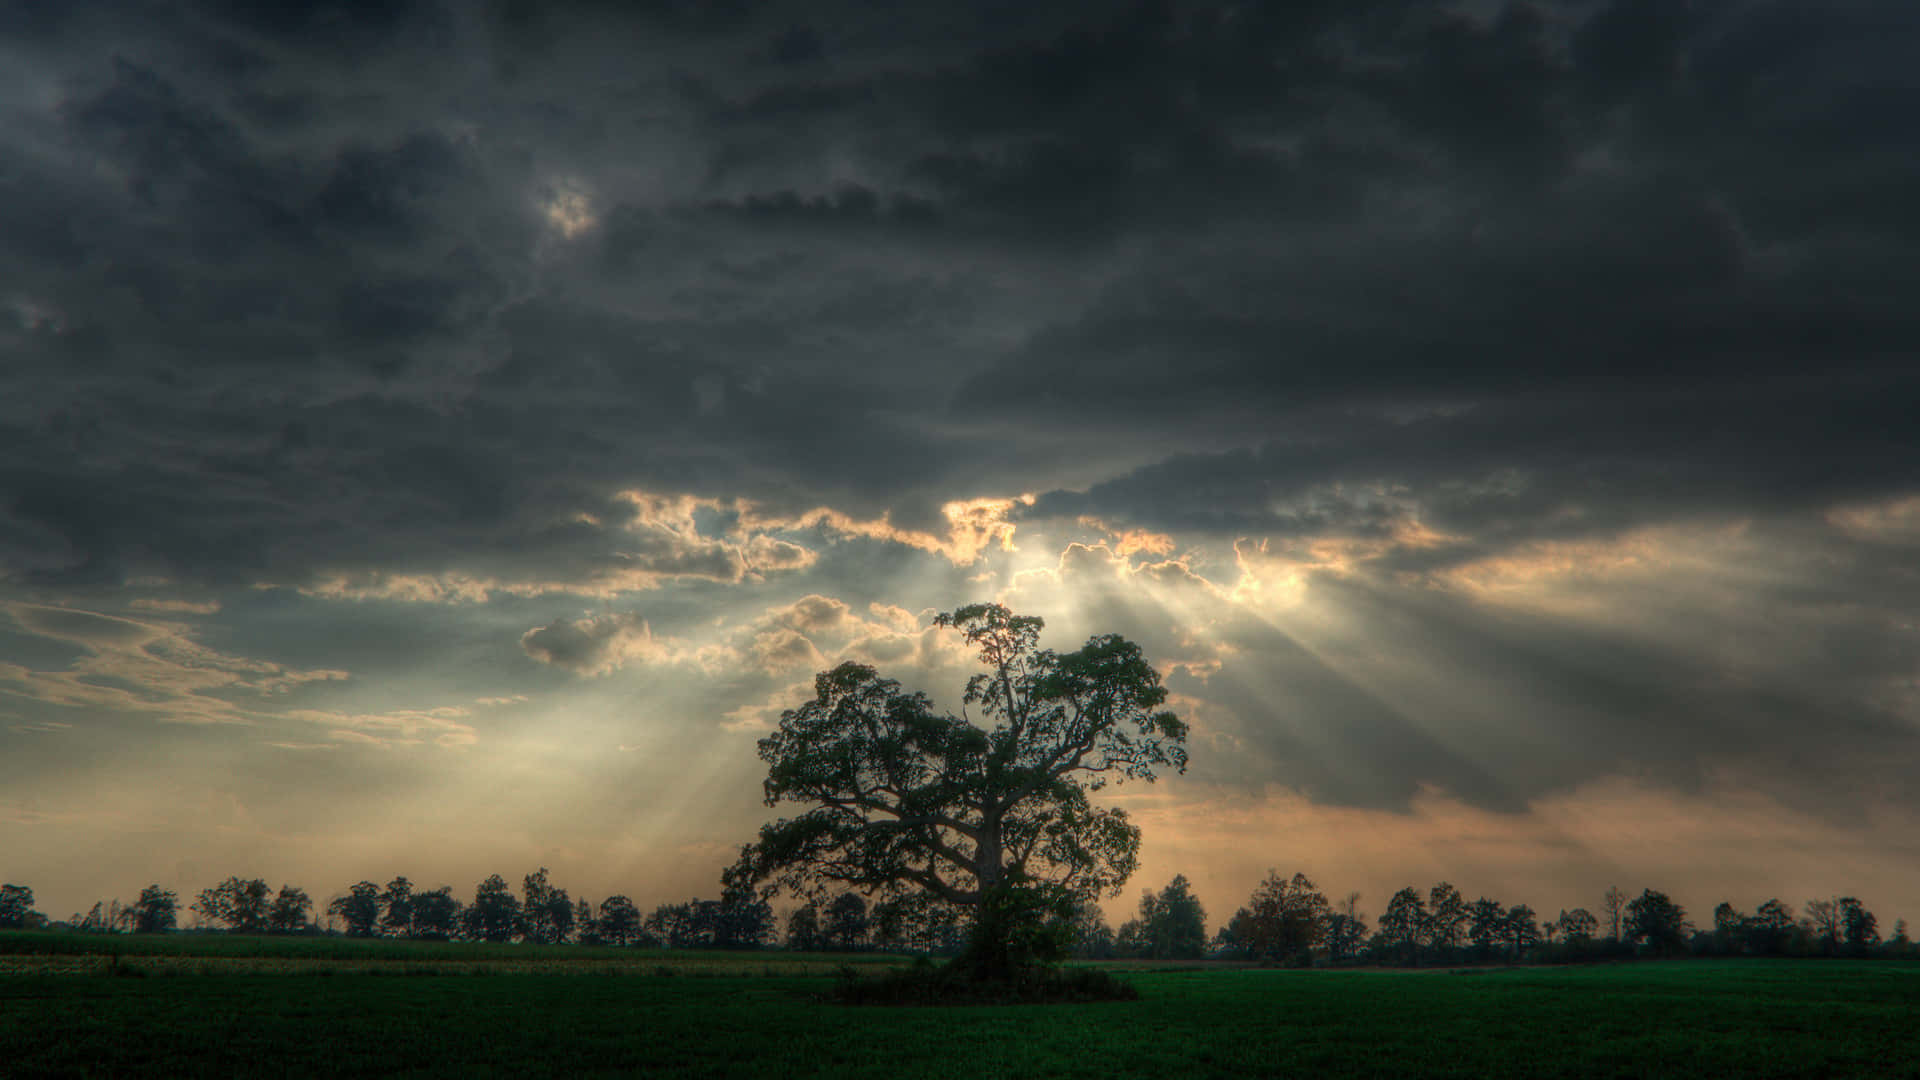 Hd Background Light Rays Between The Clouds Wallpaper